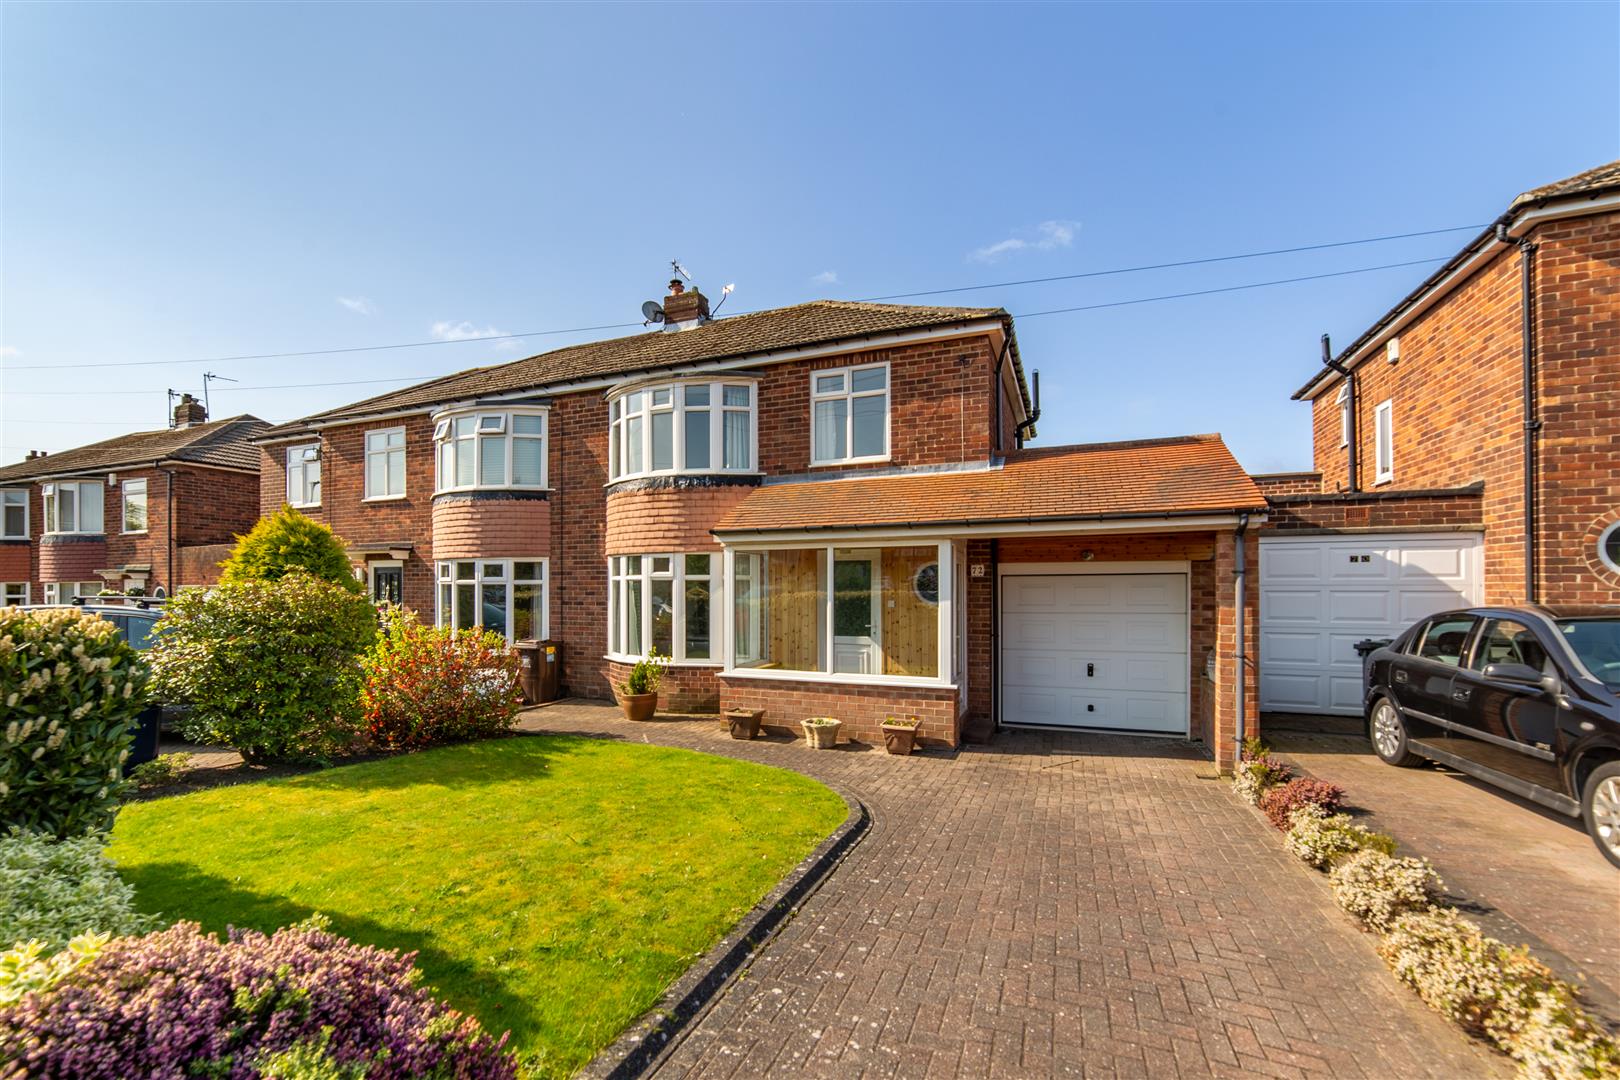 3 bed semi-detached house for sale in Greenfield Road, Newcastle Upon Tyne, NE3 